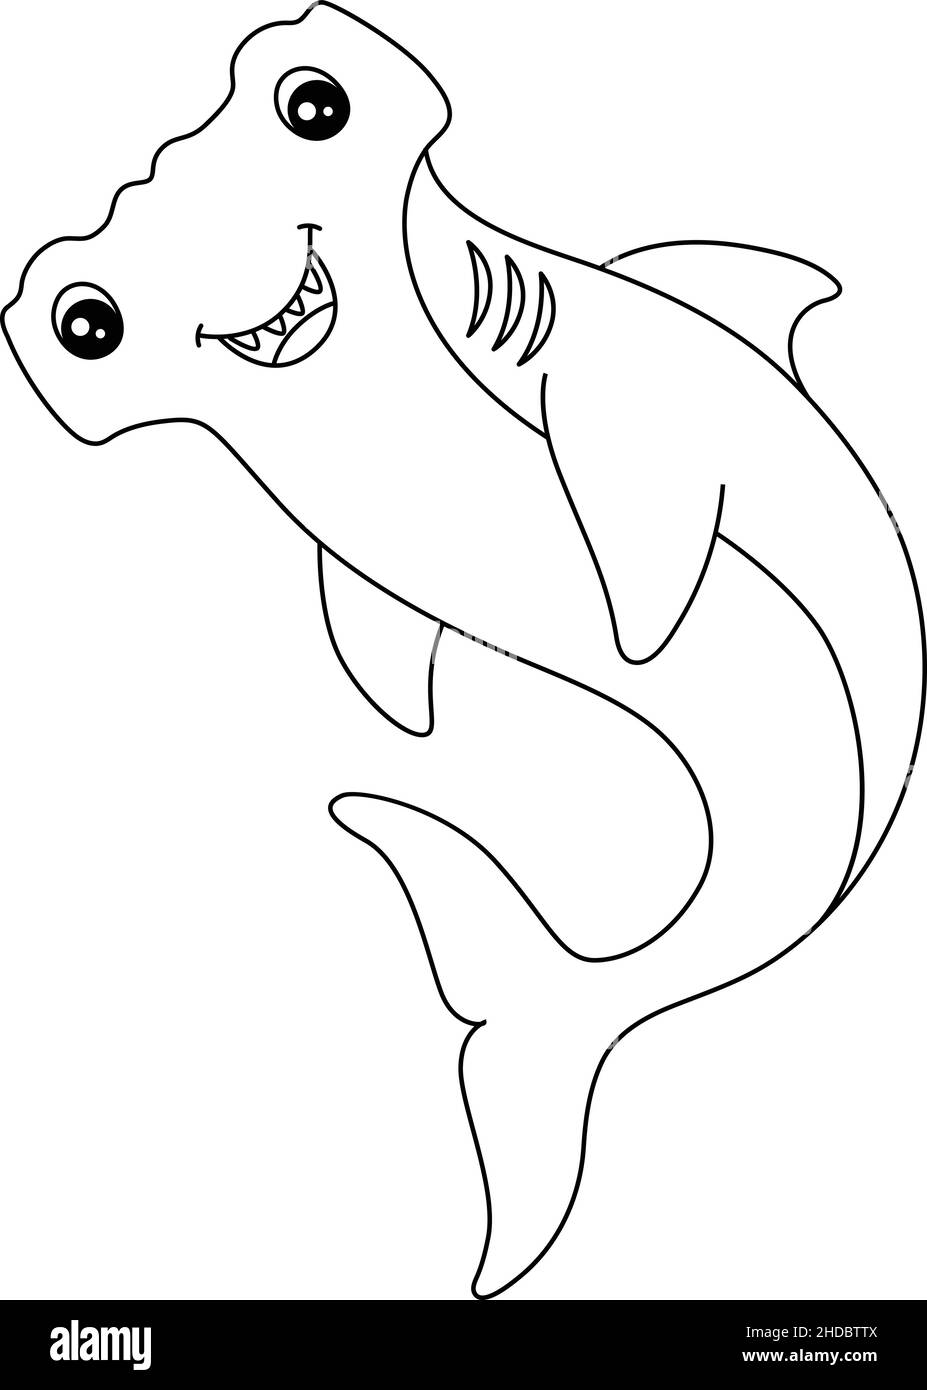 Hammerhead Shark Coloring Page Isolated for Kids Stock Vector